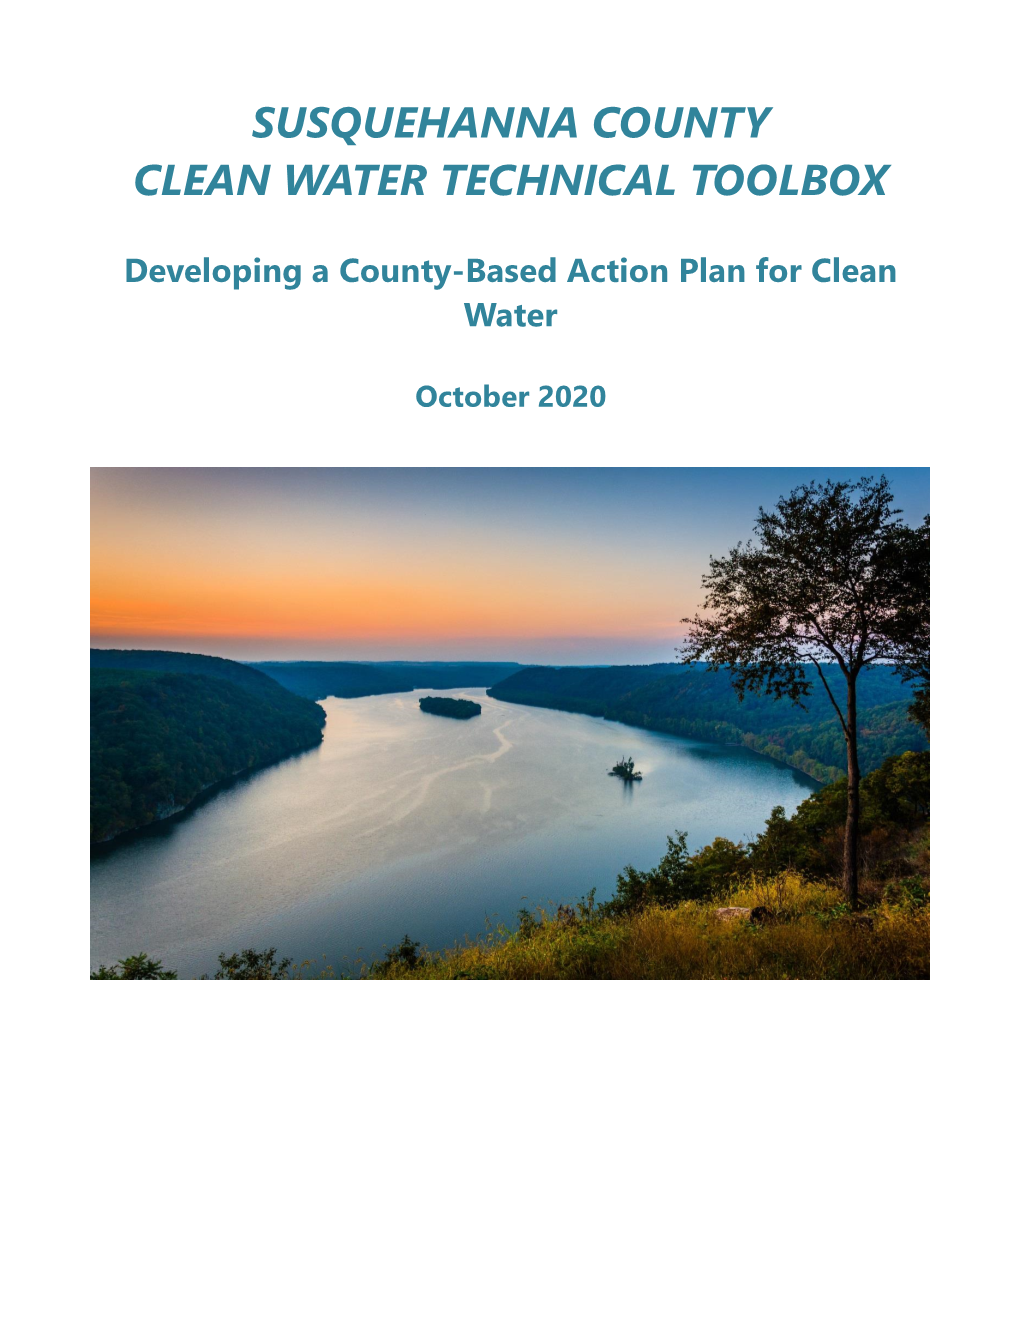 Susquehanna County Clean Water Technical Toolbox